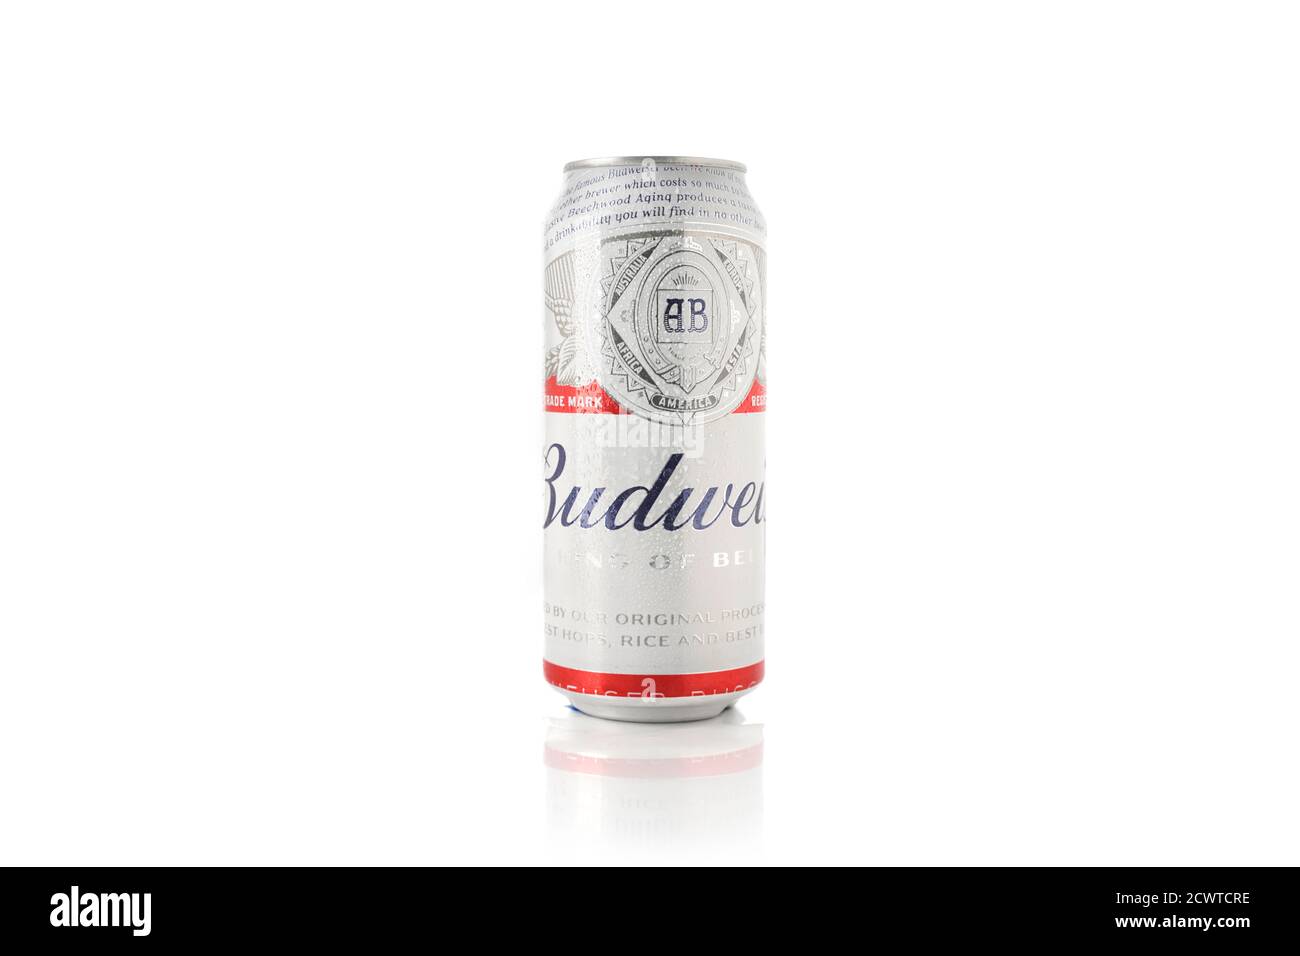 Budweiser beer can isolated on white background. Alcoholic beverage. Stock Photo